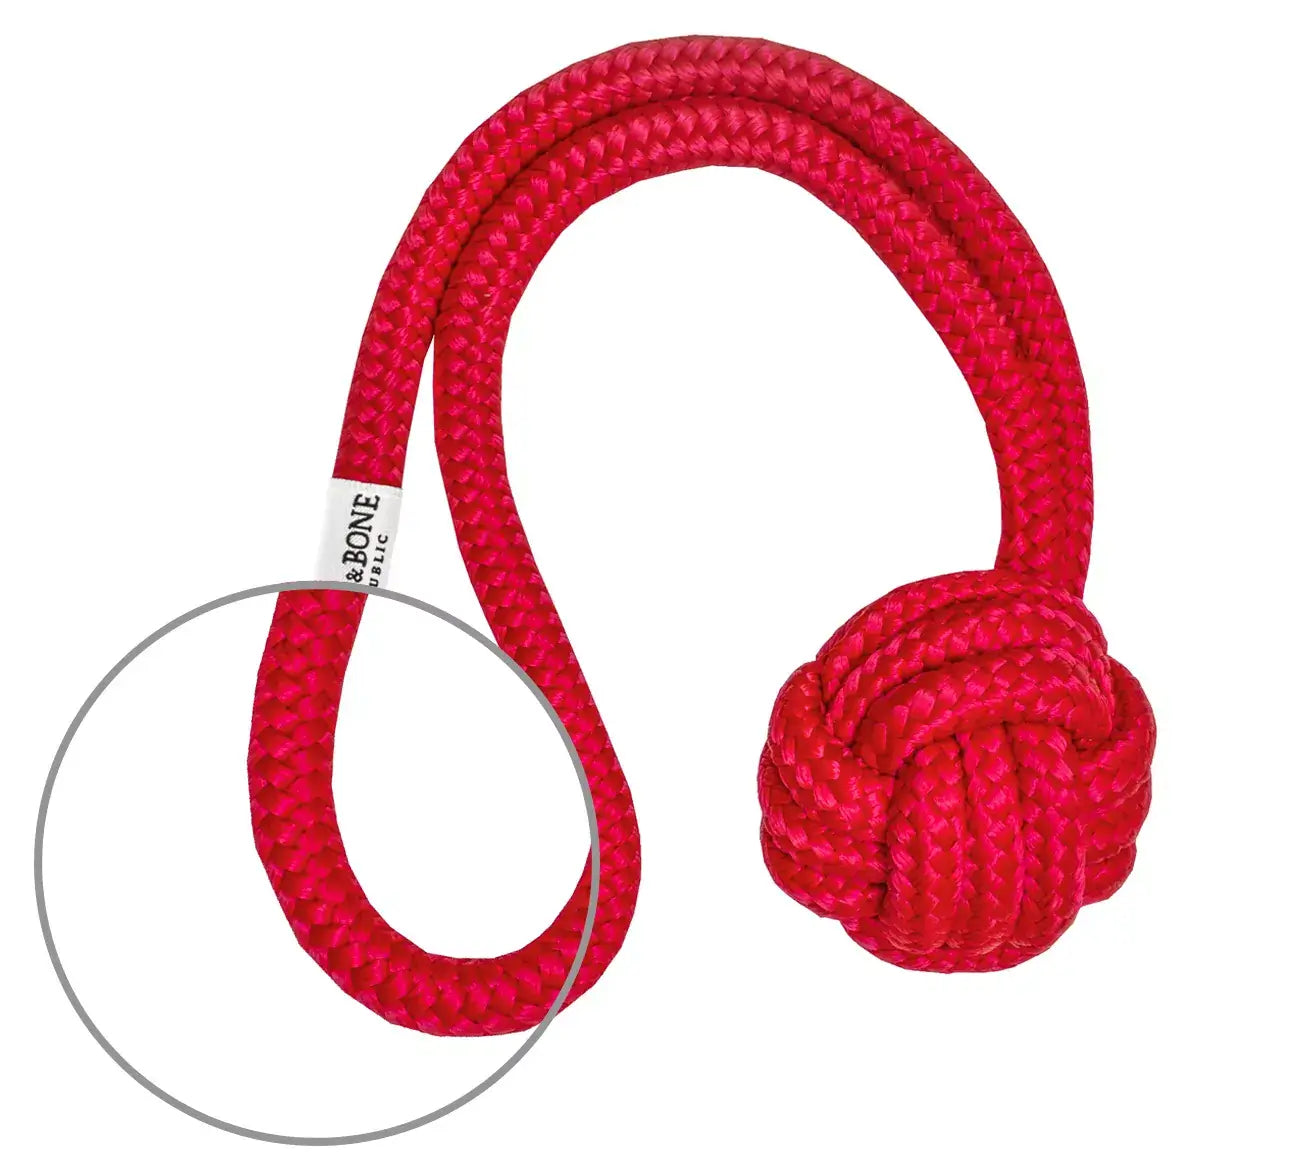 A Bowl&Bone Republic dog toy featuring a red rope and ball.